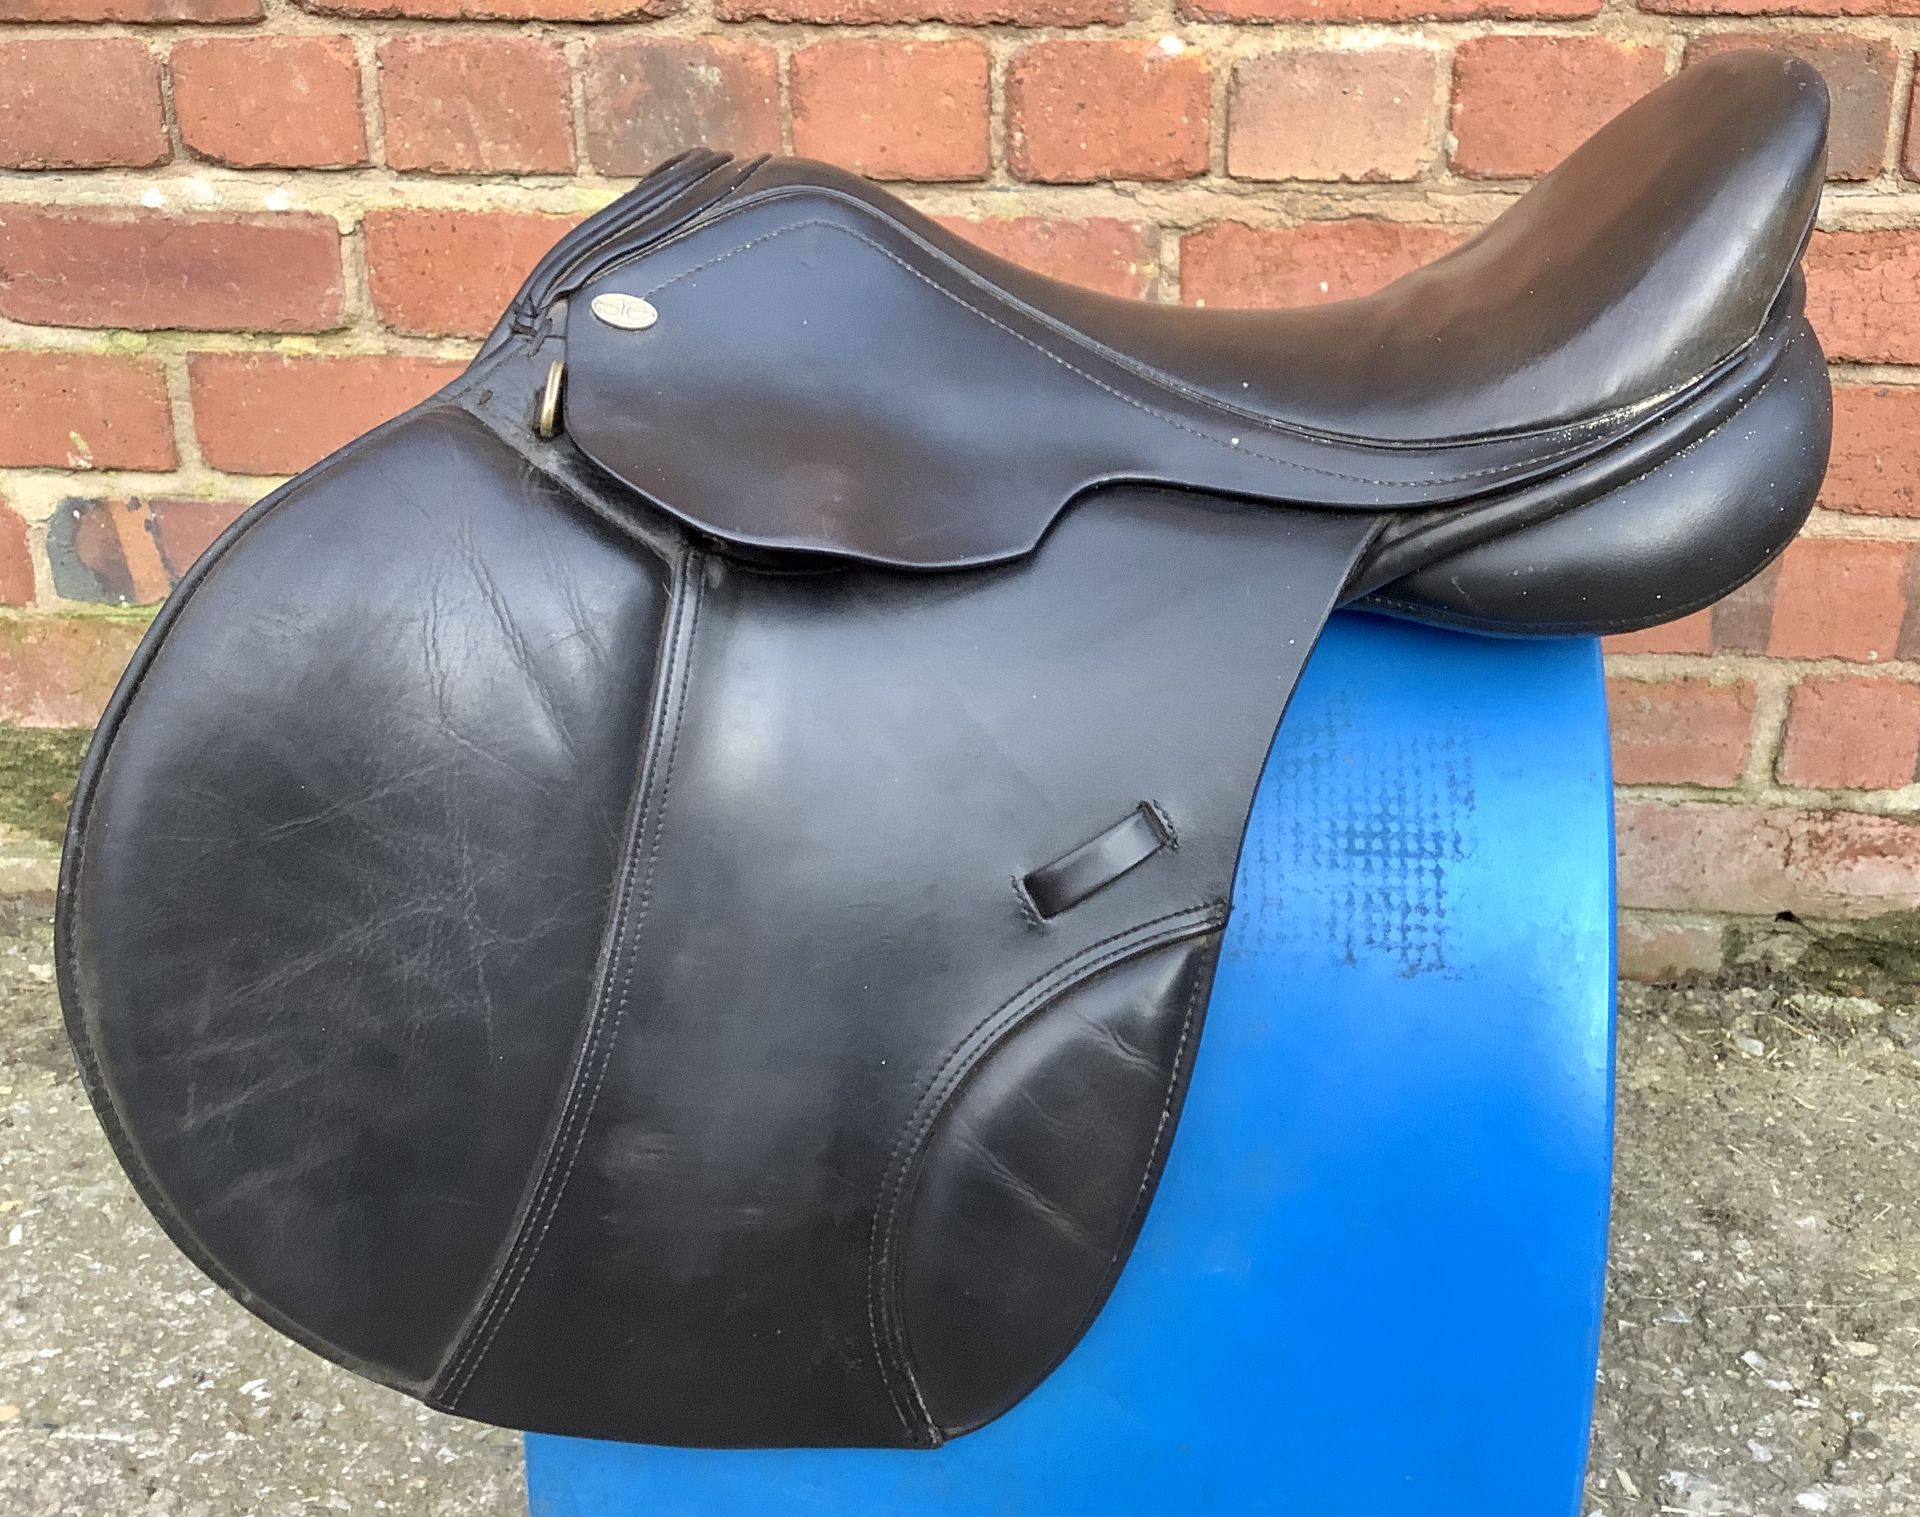 17" Wide Jorge Canaves Jumping Saddle = Black